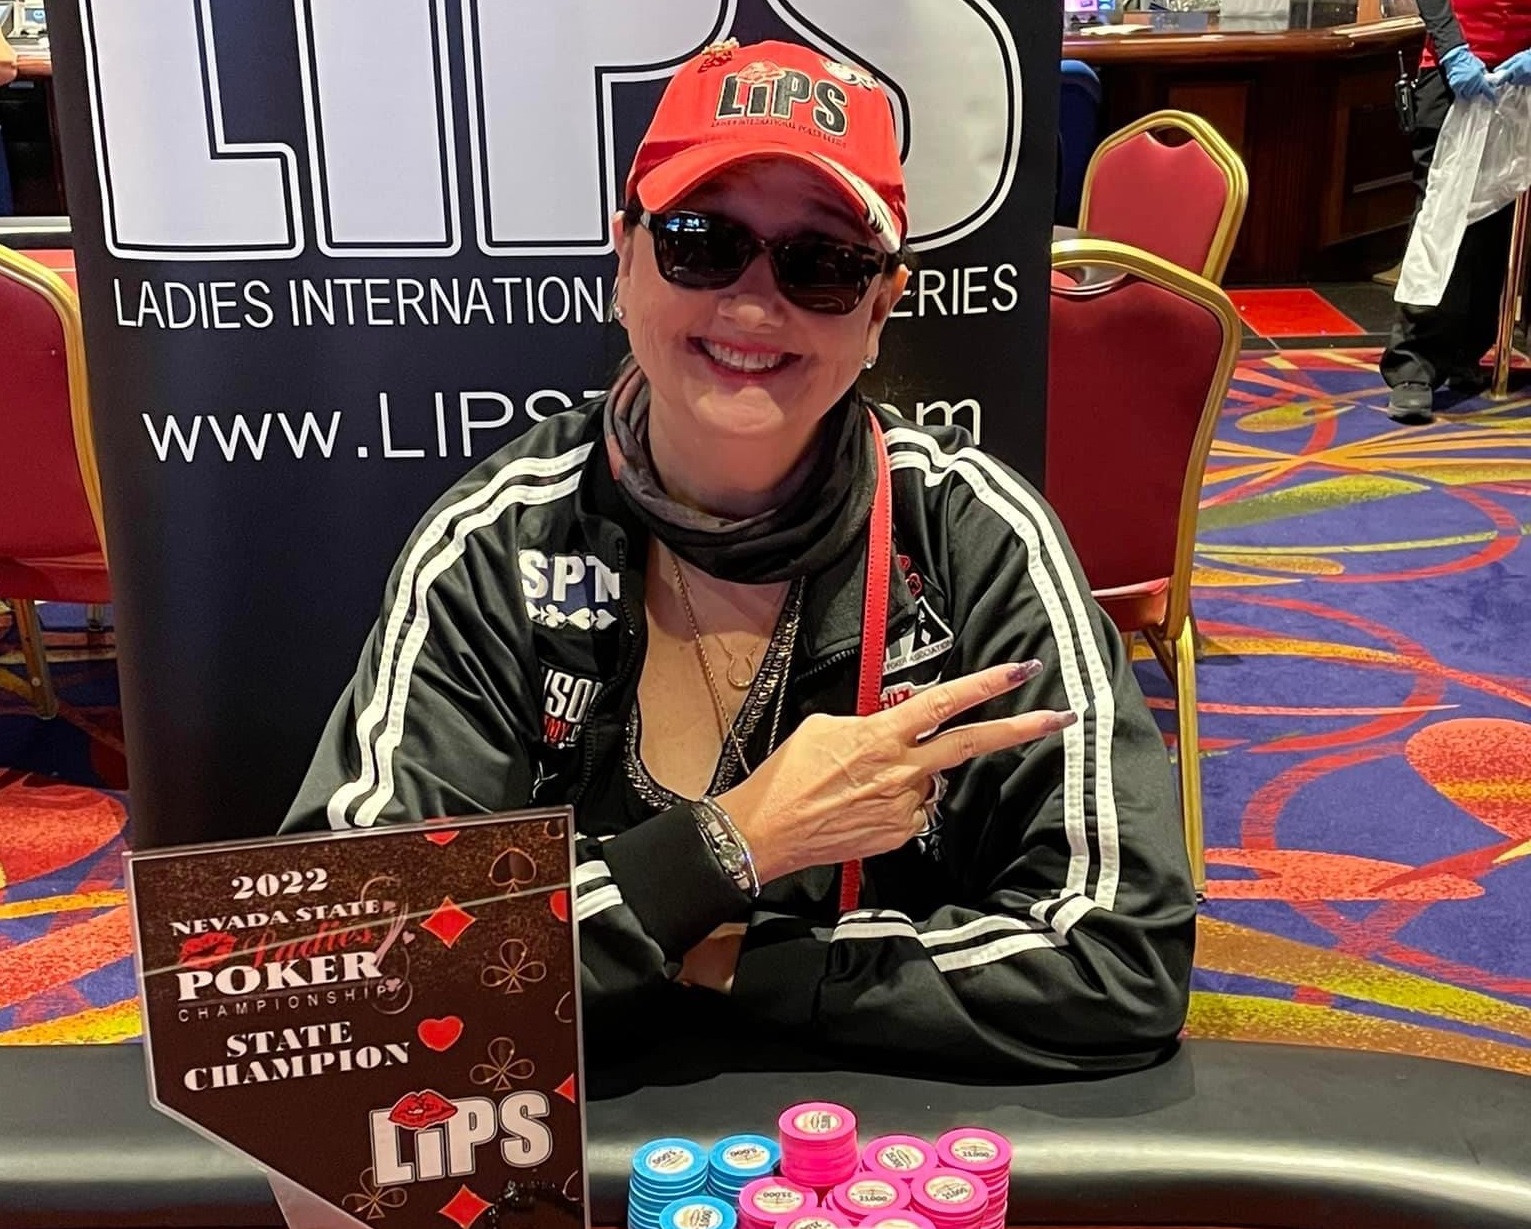 Heart Issue Won’t Stop Poker Champ Ruth Hall from Trying to Repeat